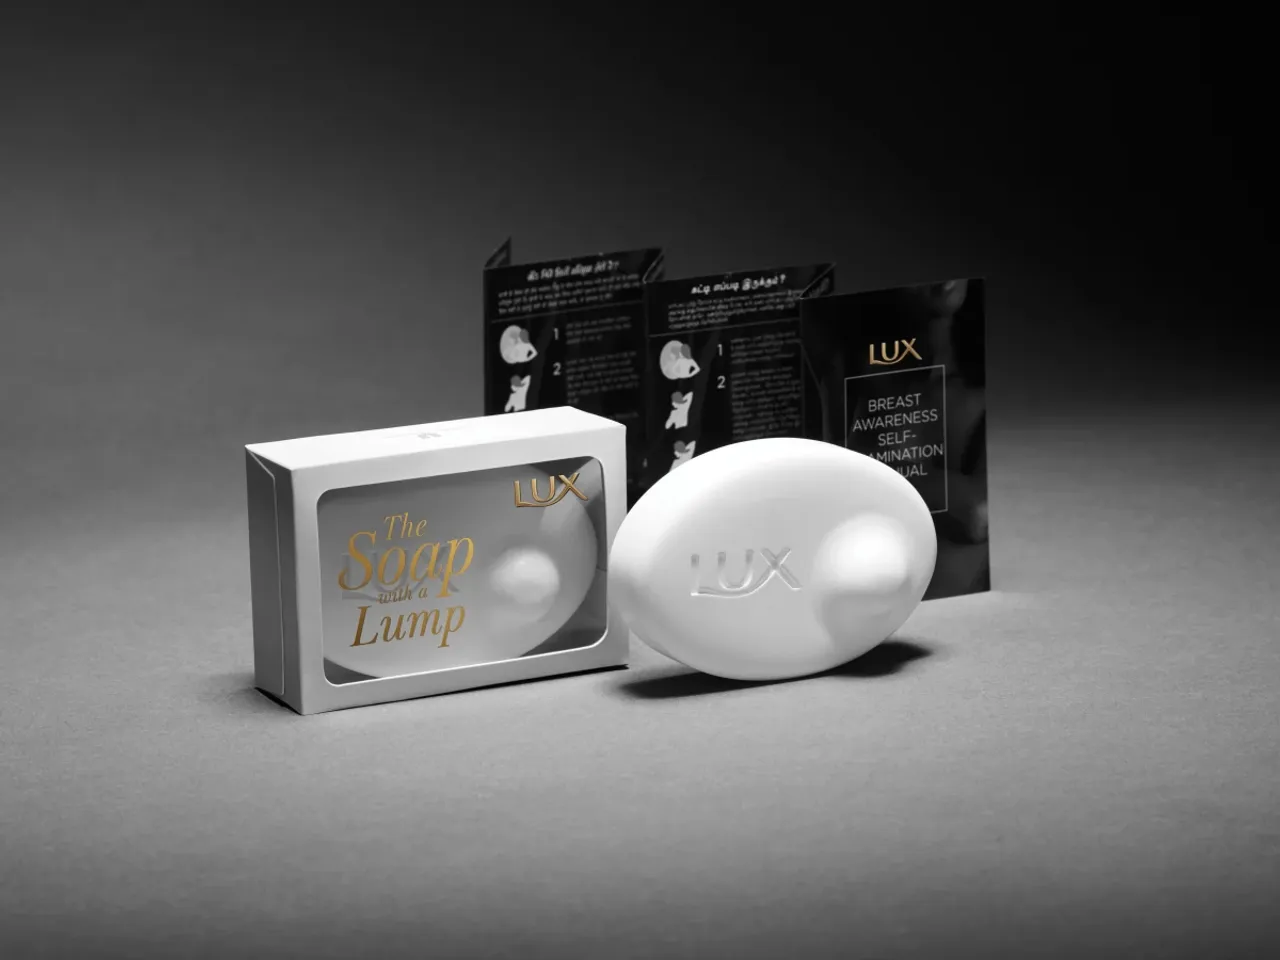 Lux Soap with a lump